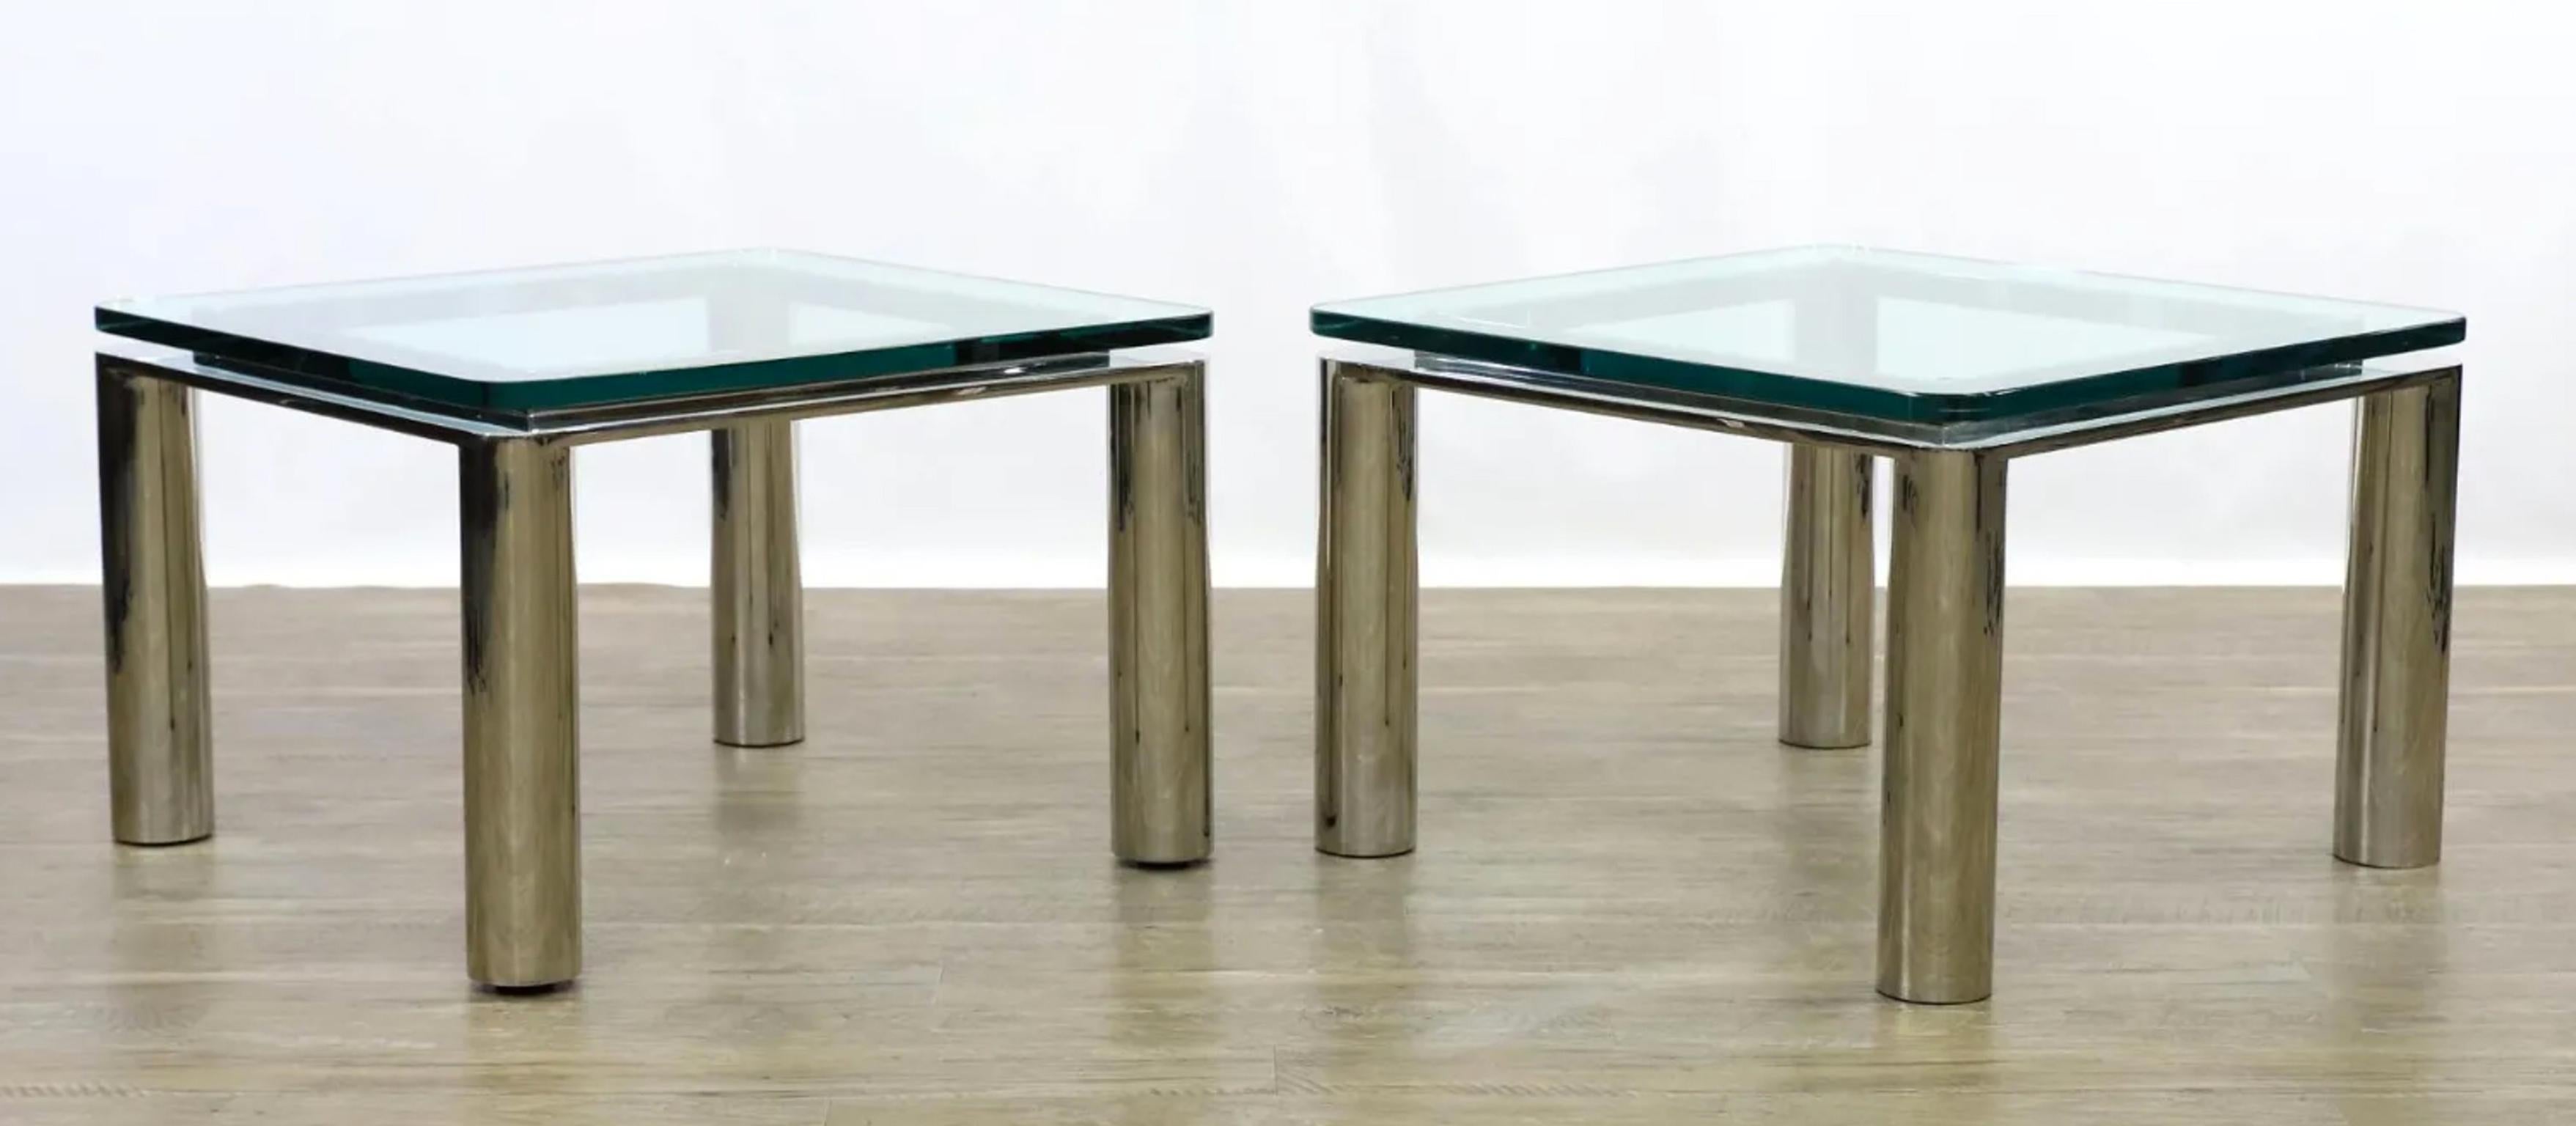 Pair of Mid-Century Modern Square thick clear Glass and Chrome Tube side Tables. Very high quality metal fabrication with chrome plating bases with 3/4